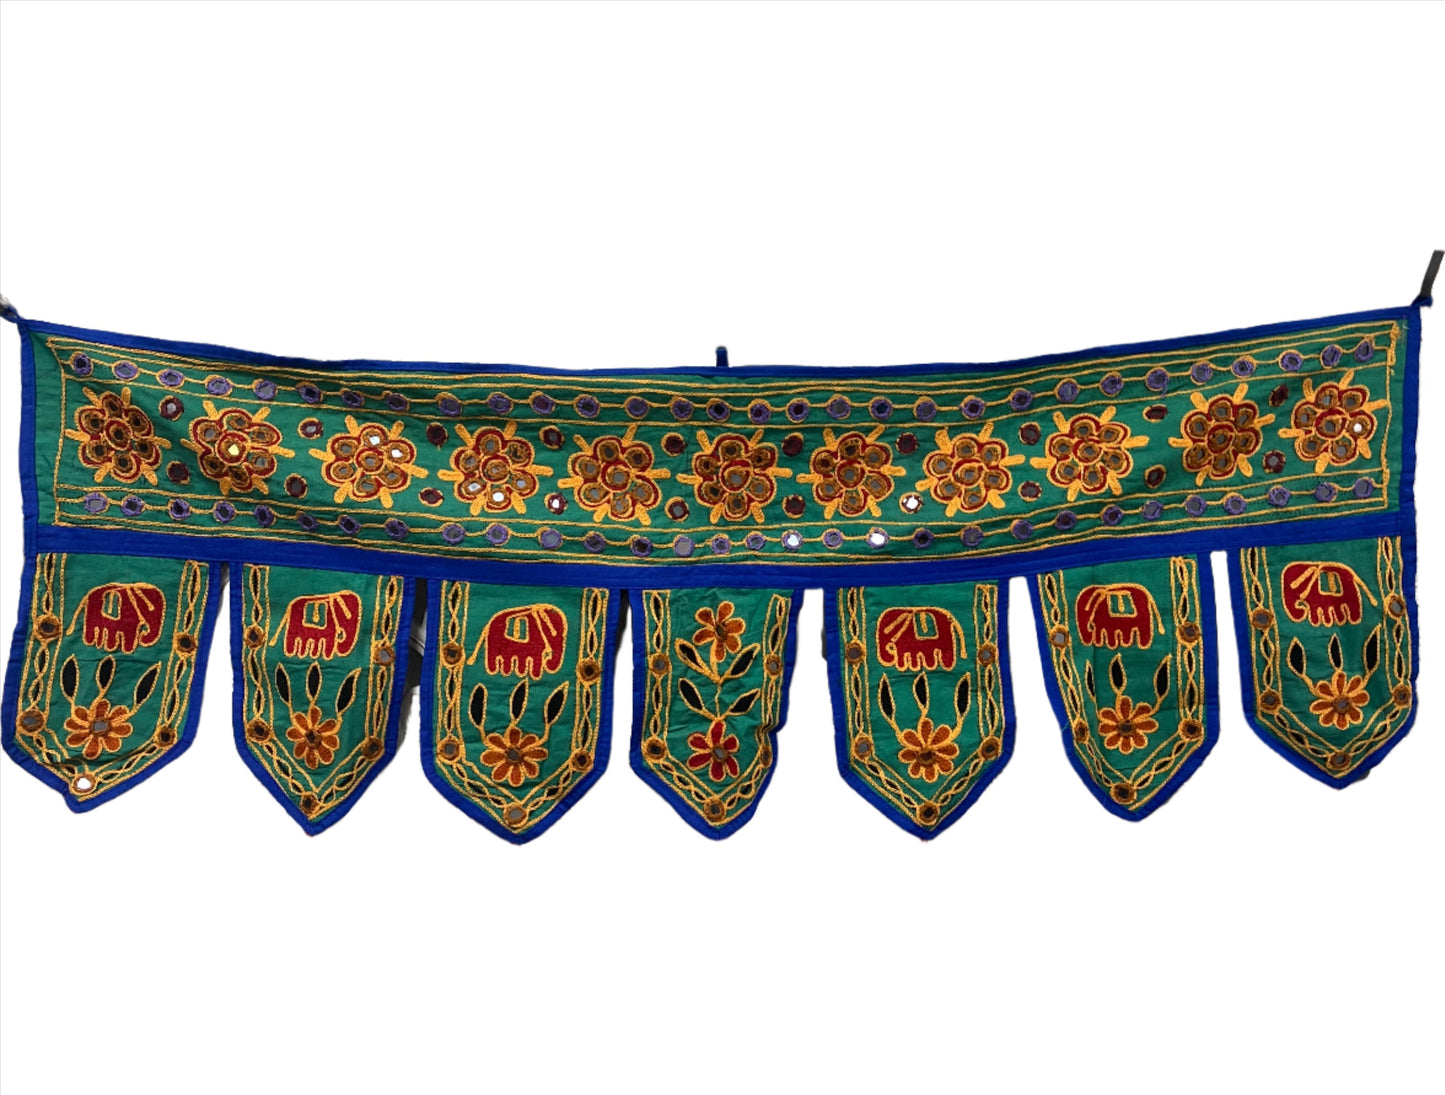 Rajasthani Embroidered Toran with Elephants and Mirrors - Available in 6 Colors